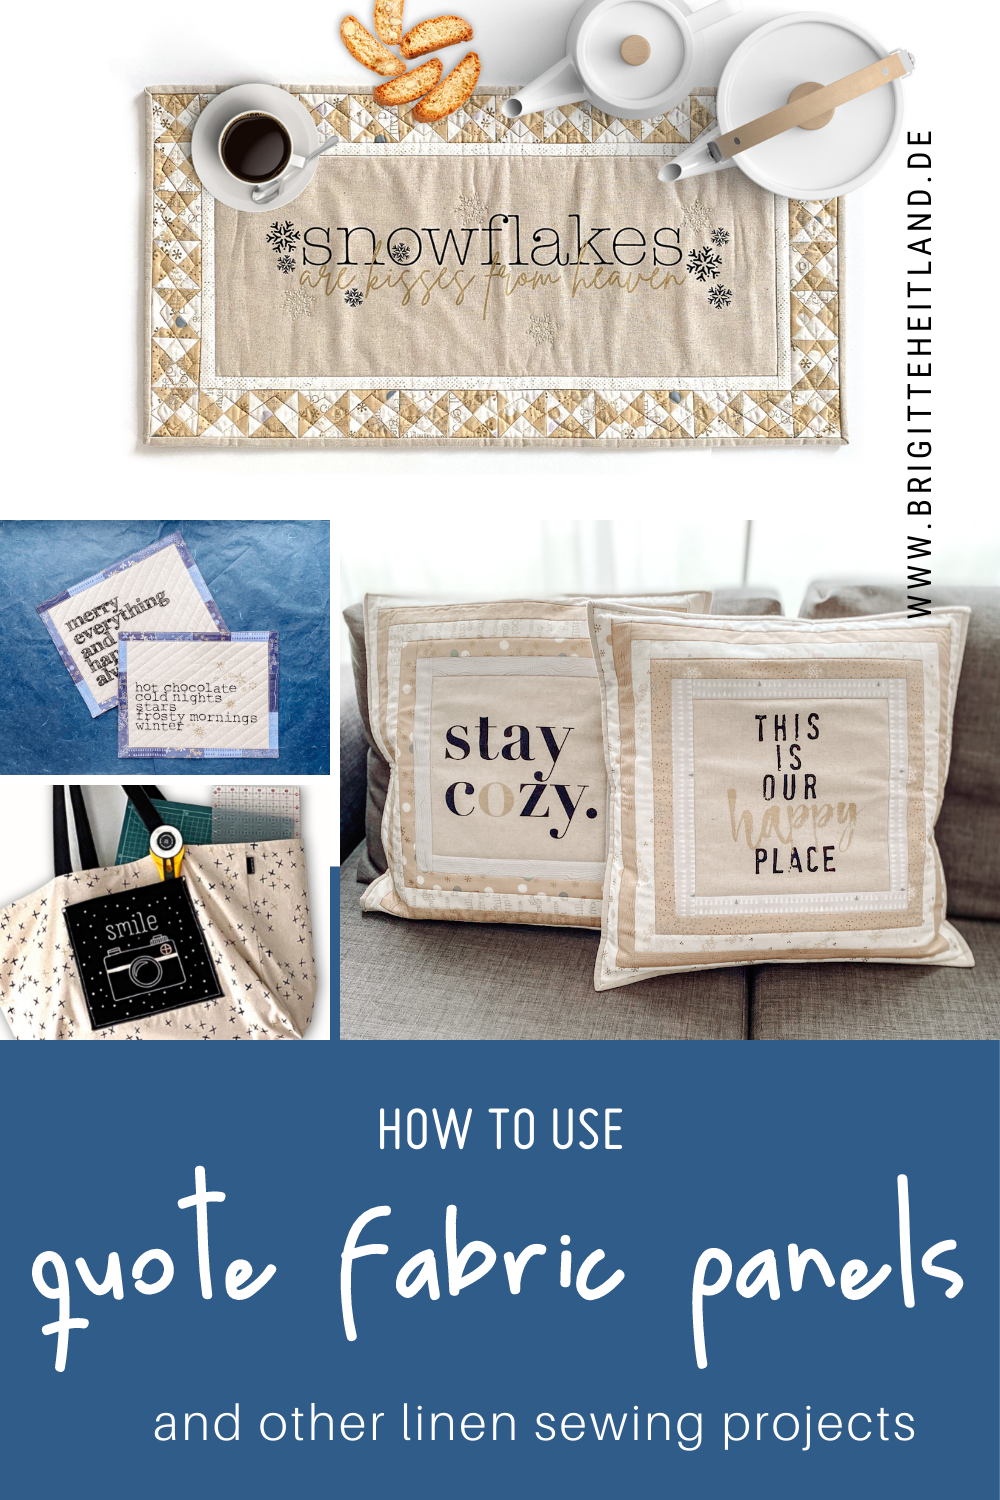 How to use linen quote fabric panels - a list with 16 projects by Zen Chic